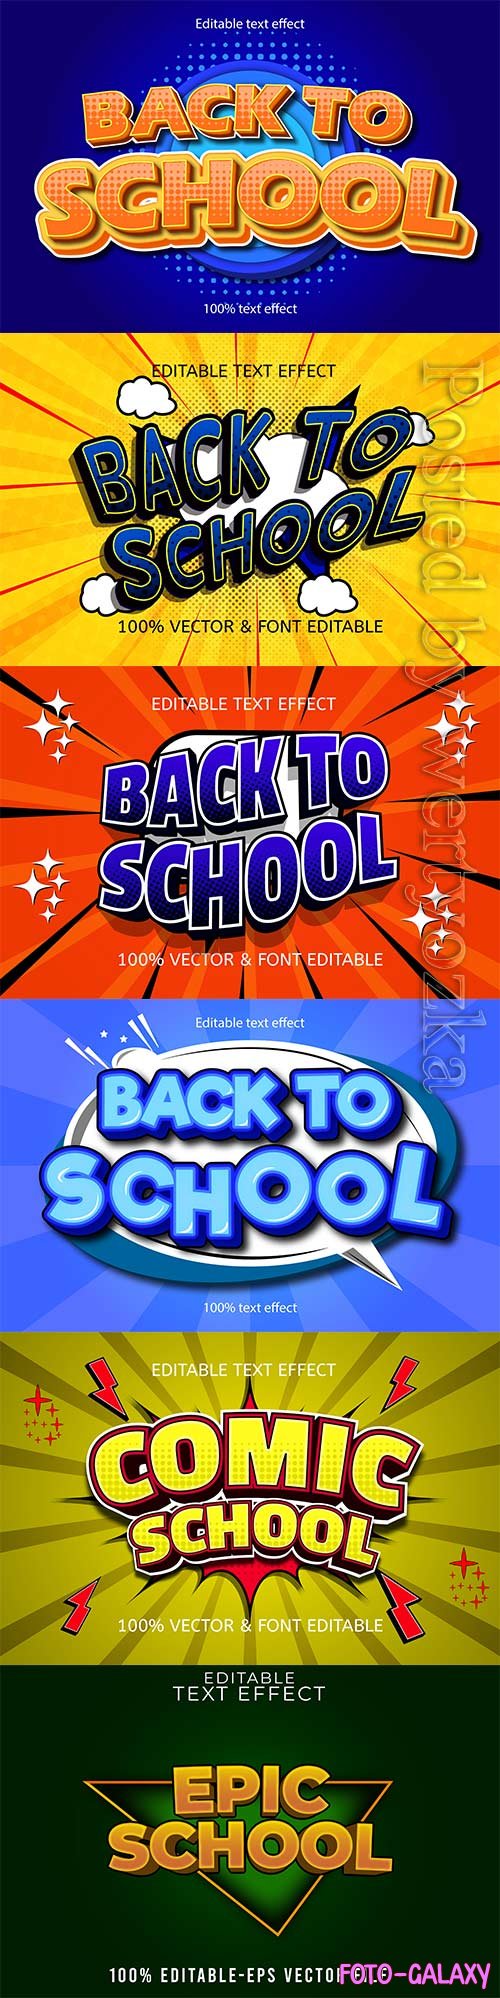 Back to school editable text effect vol 7